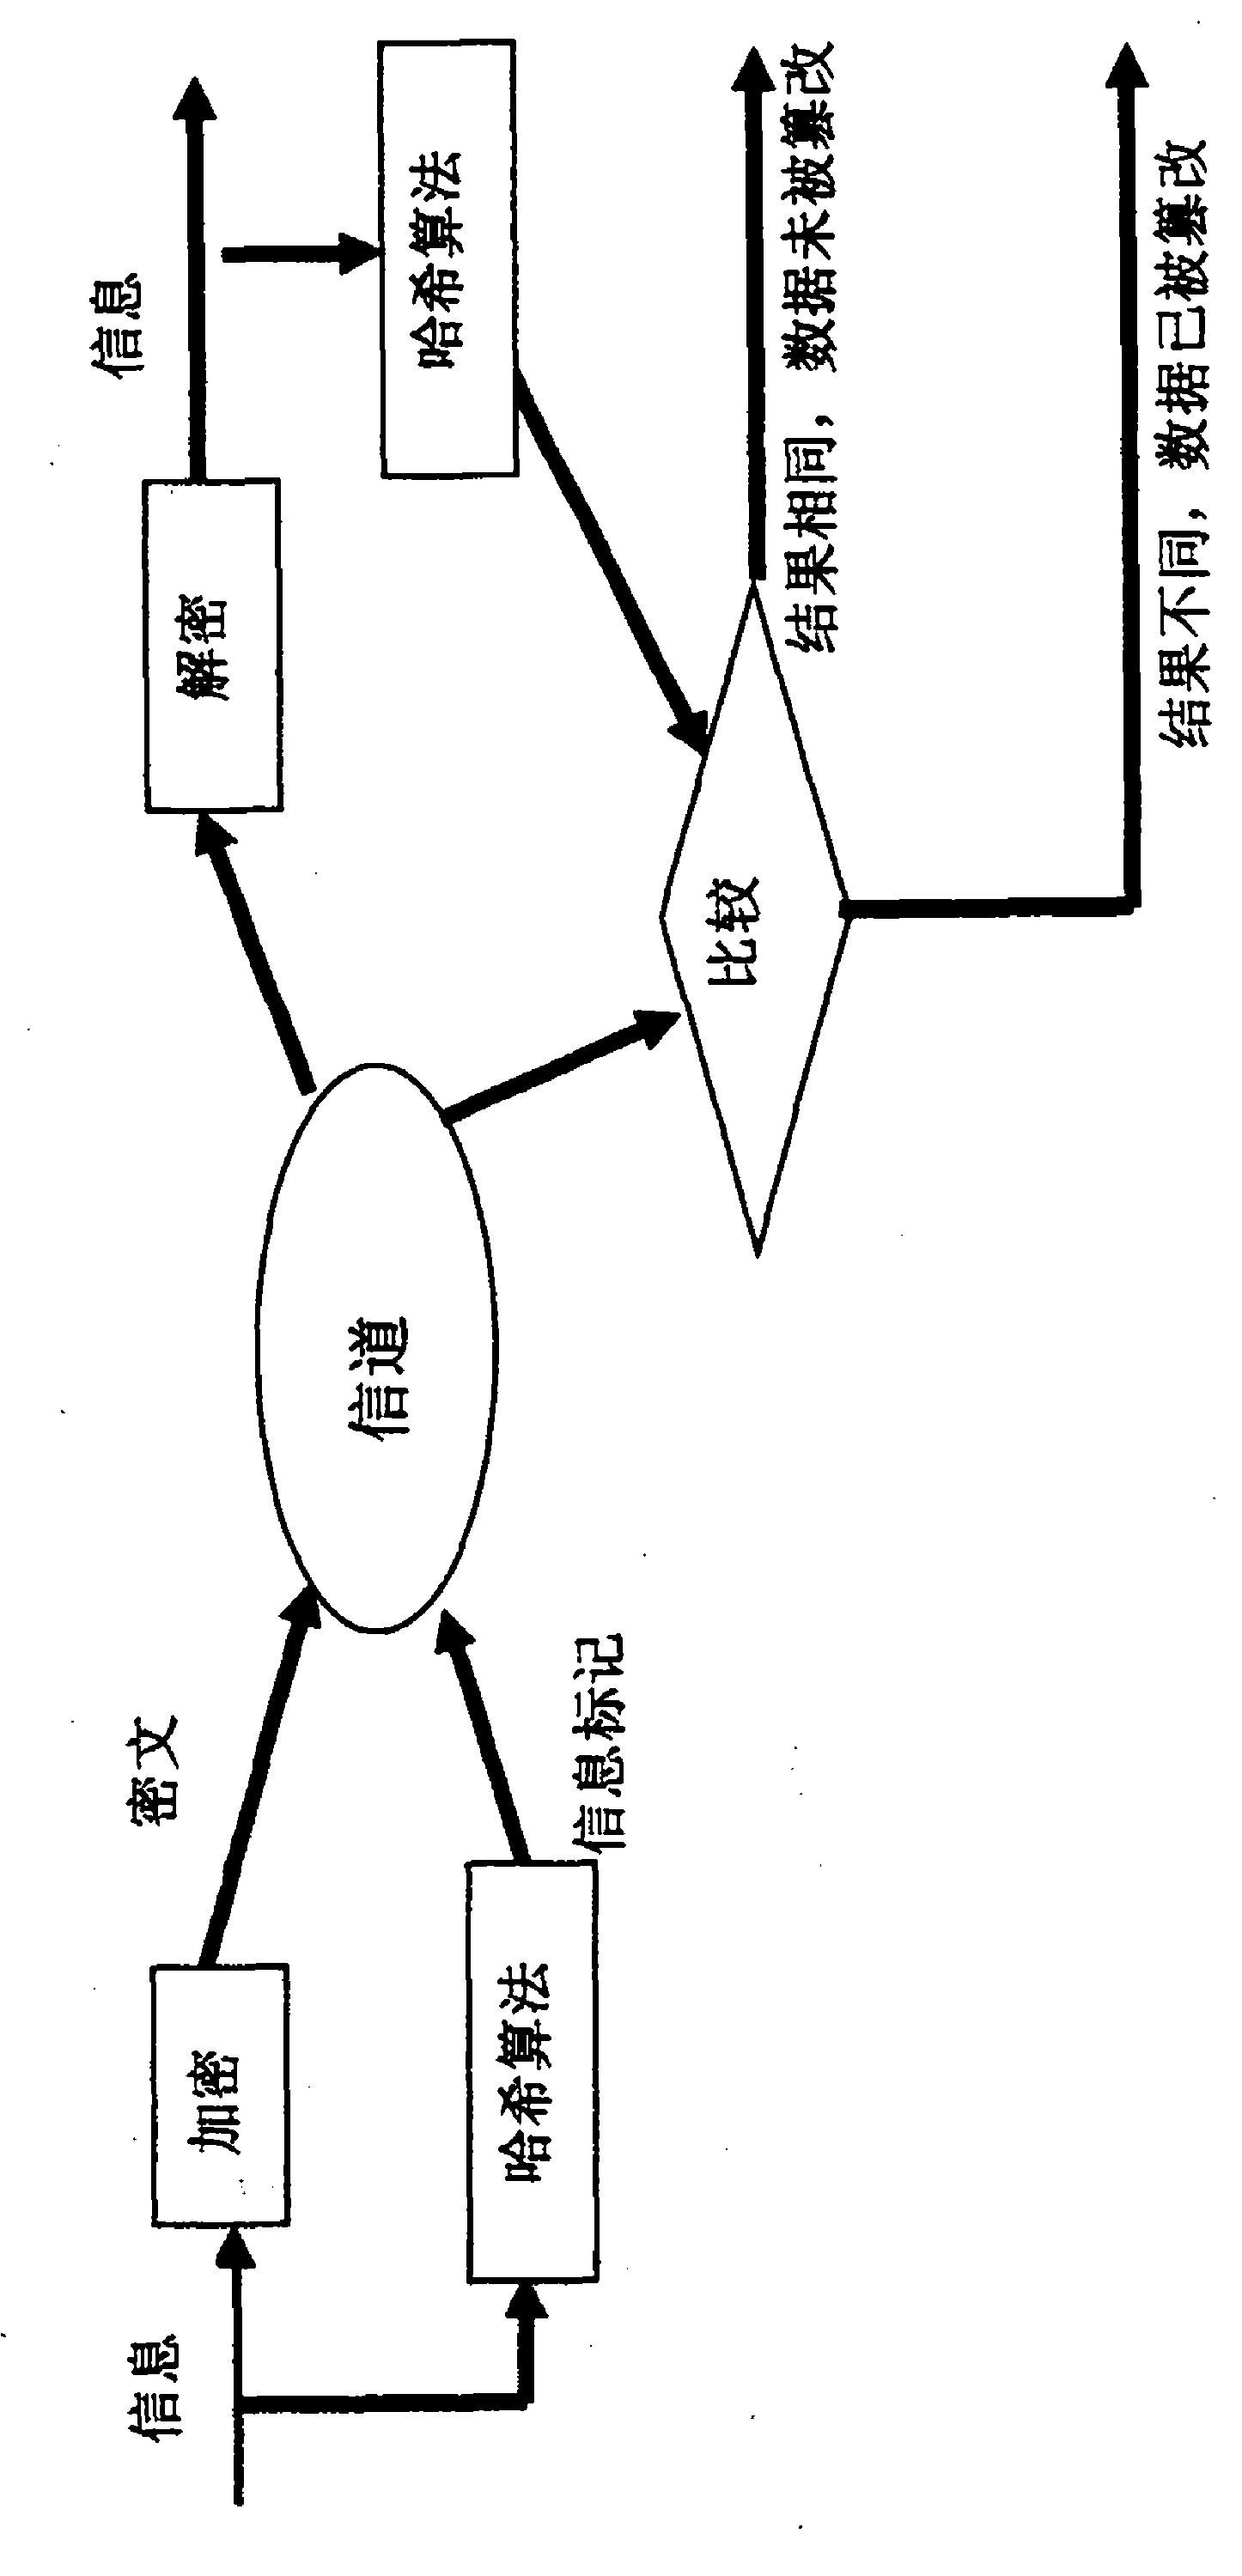 External information source encryption and anti-eavesdrop interference device for voice communication device